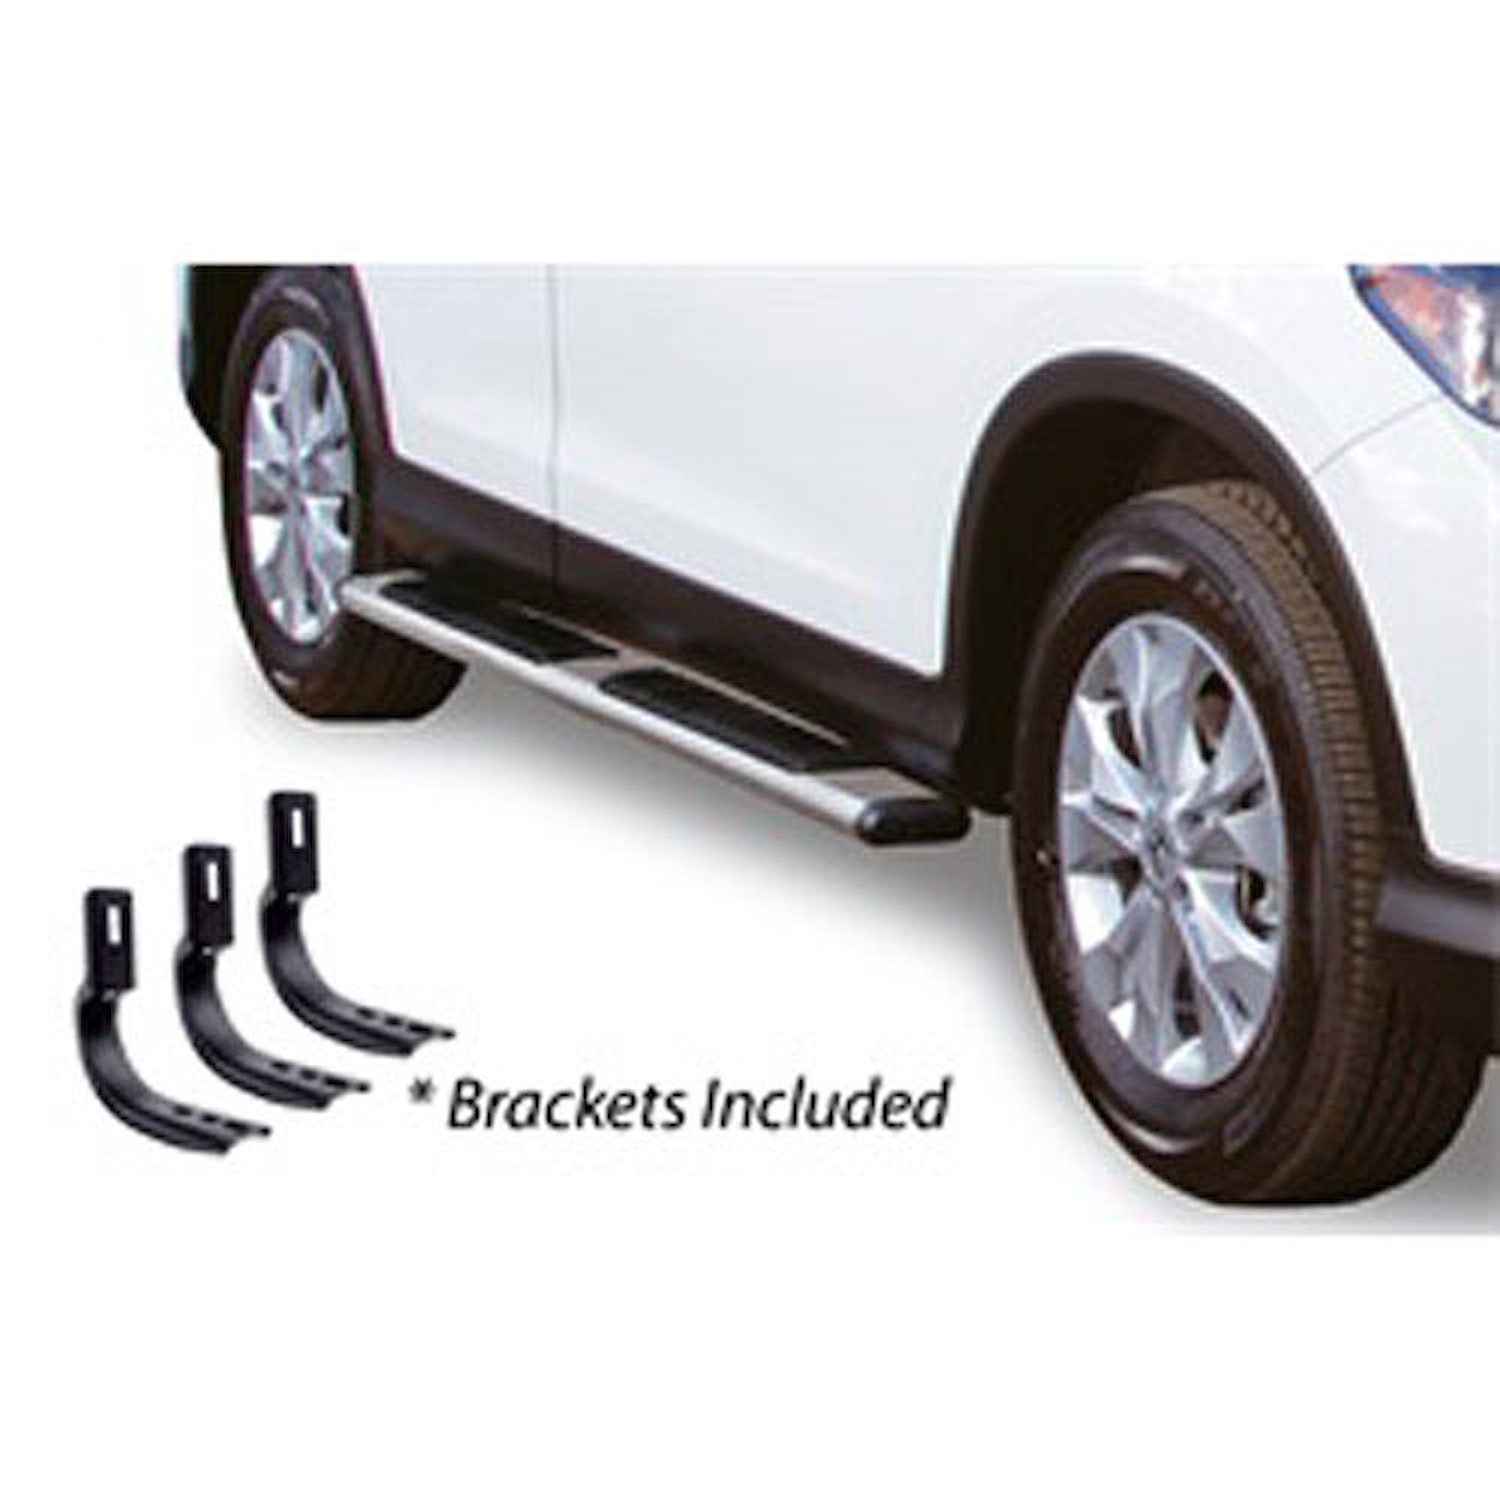 5" OE Xtreme Low Profile SideSteps Kit 2007-13 Chevy Avalanche